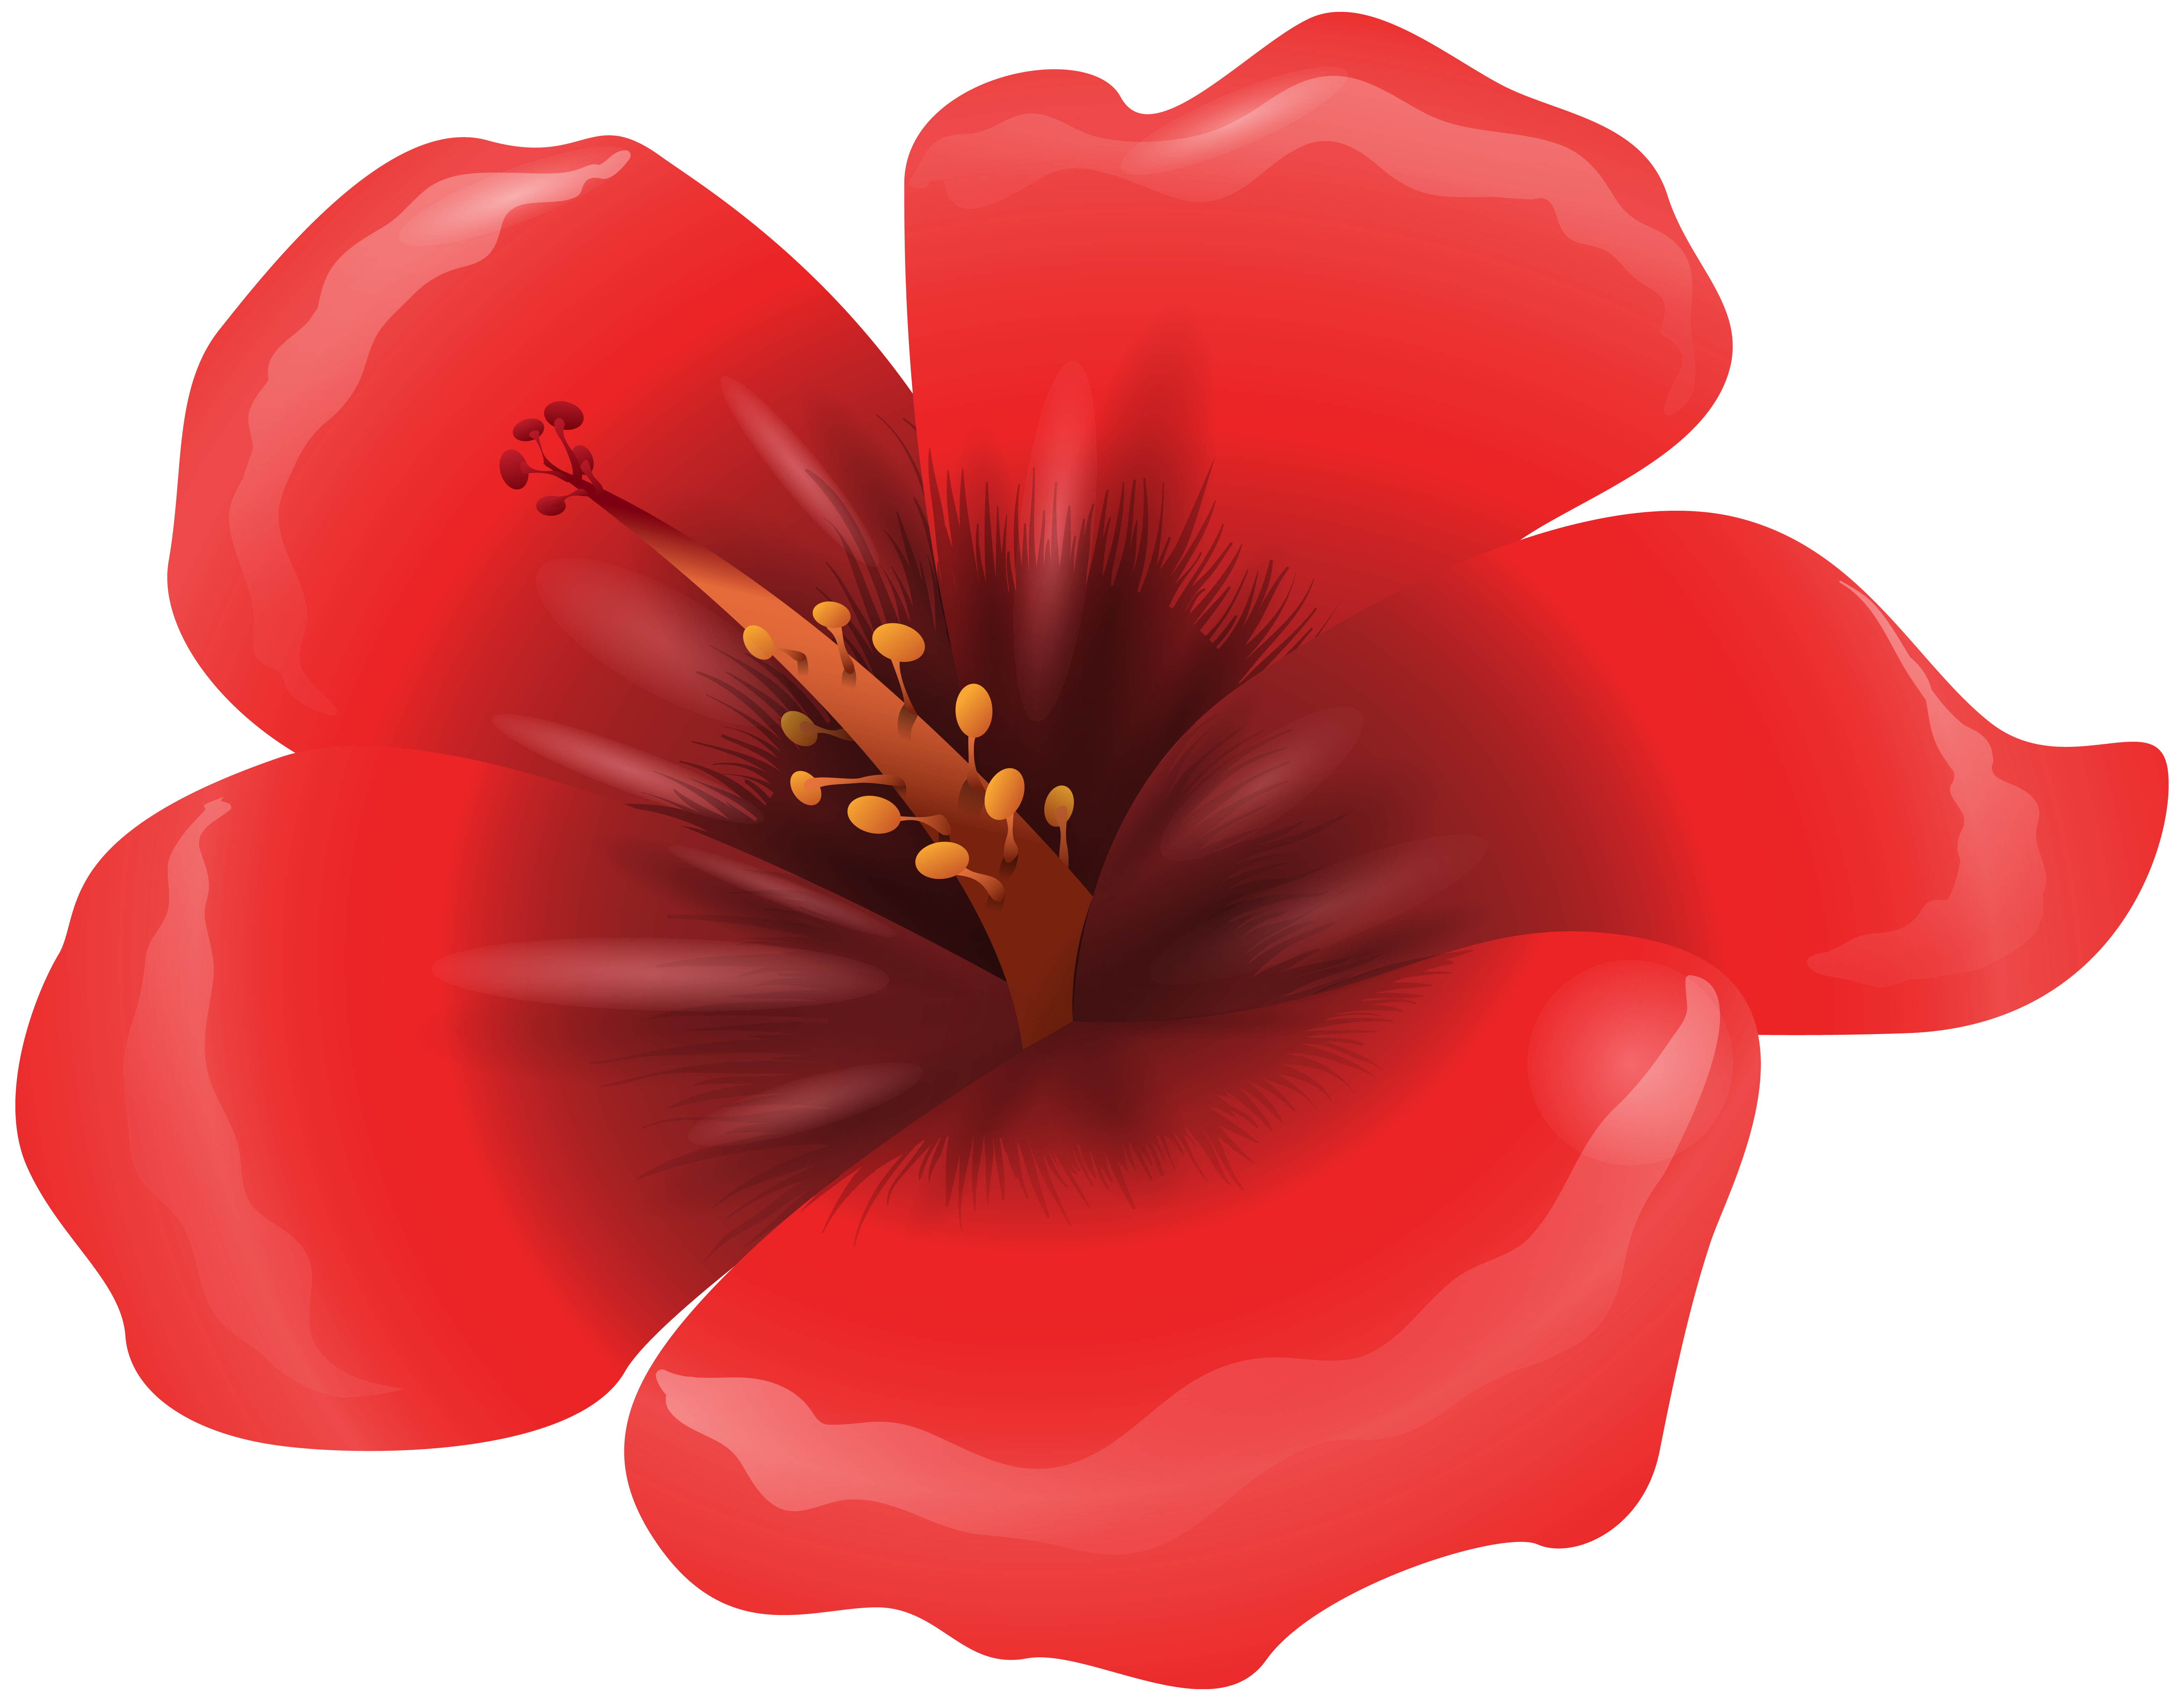 Large Red Flower Clipart PNG Image | Gallery Yopriceville - High ...